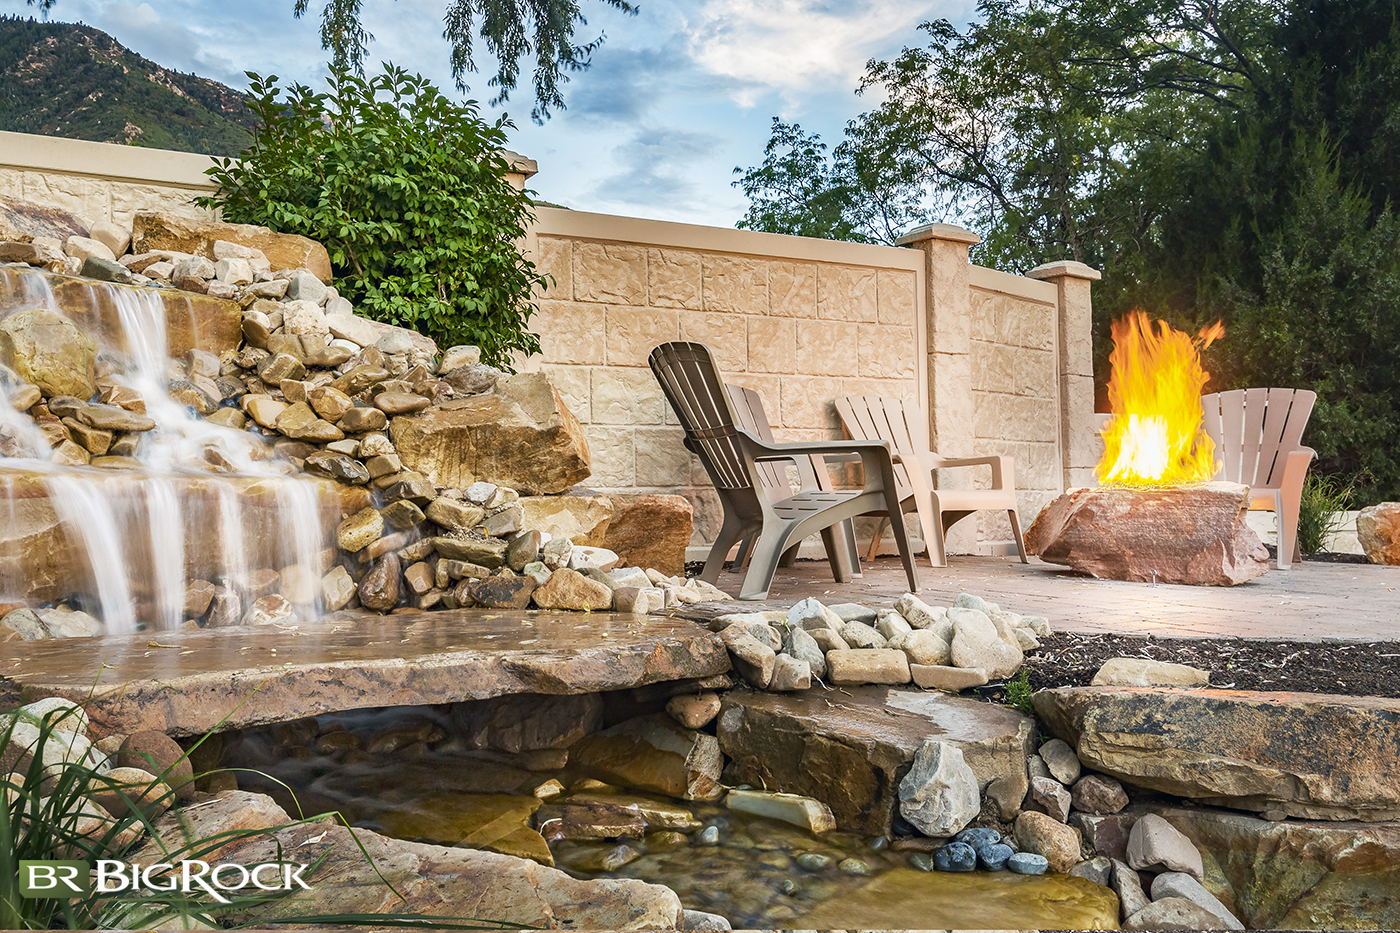 The sounds of nature are healing, and your landscape can bring those healing elements to your backyard with a flowing creek and waterfall.